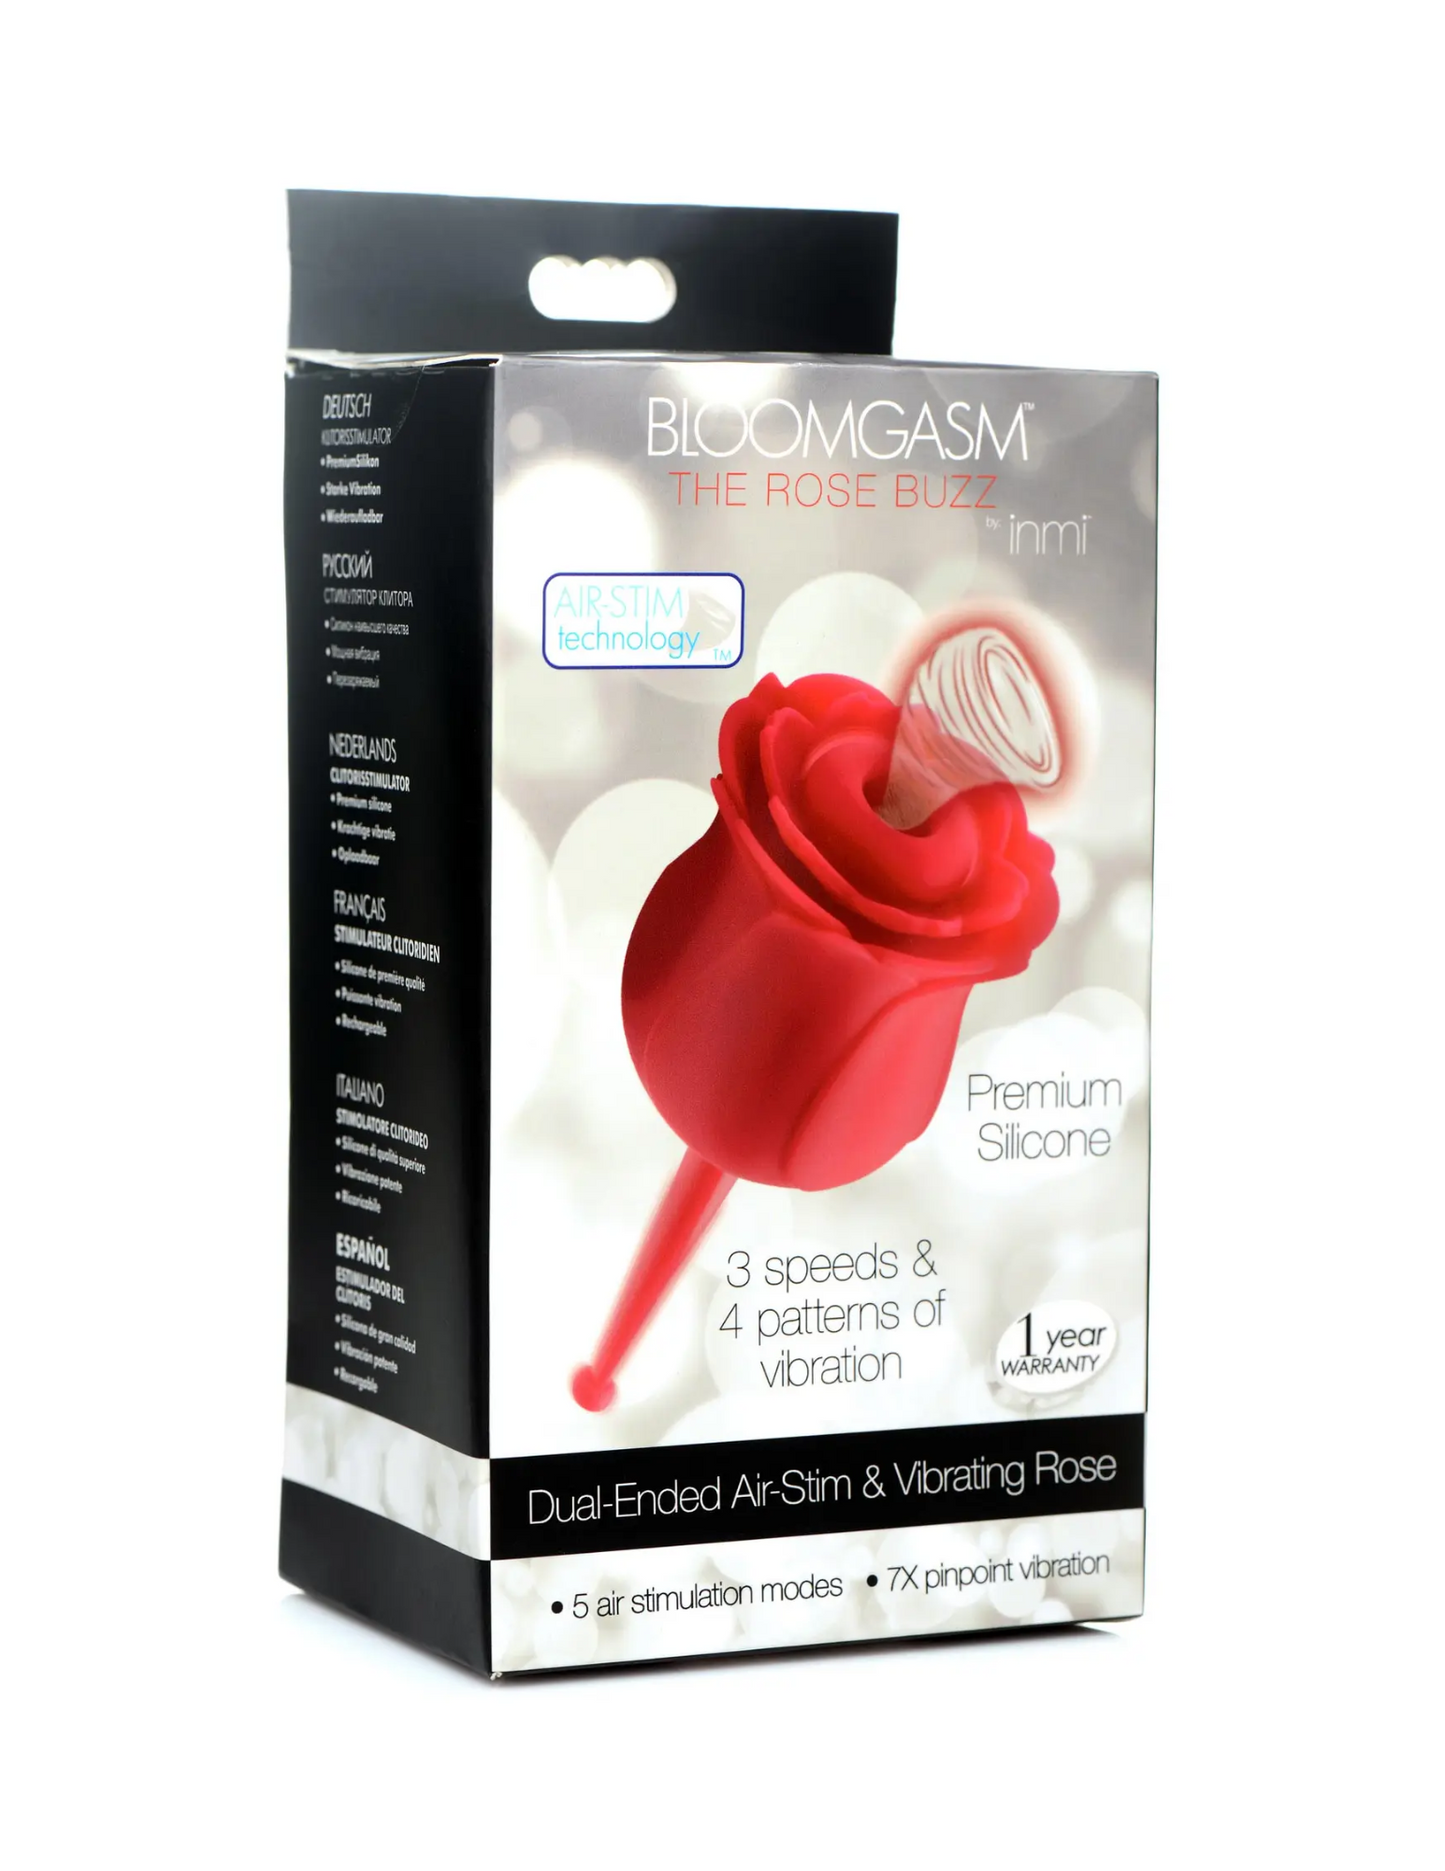 Photo of the front of the box for the Bloomgasm Rose Buzz Clit Stimulator from XR Brands.